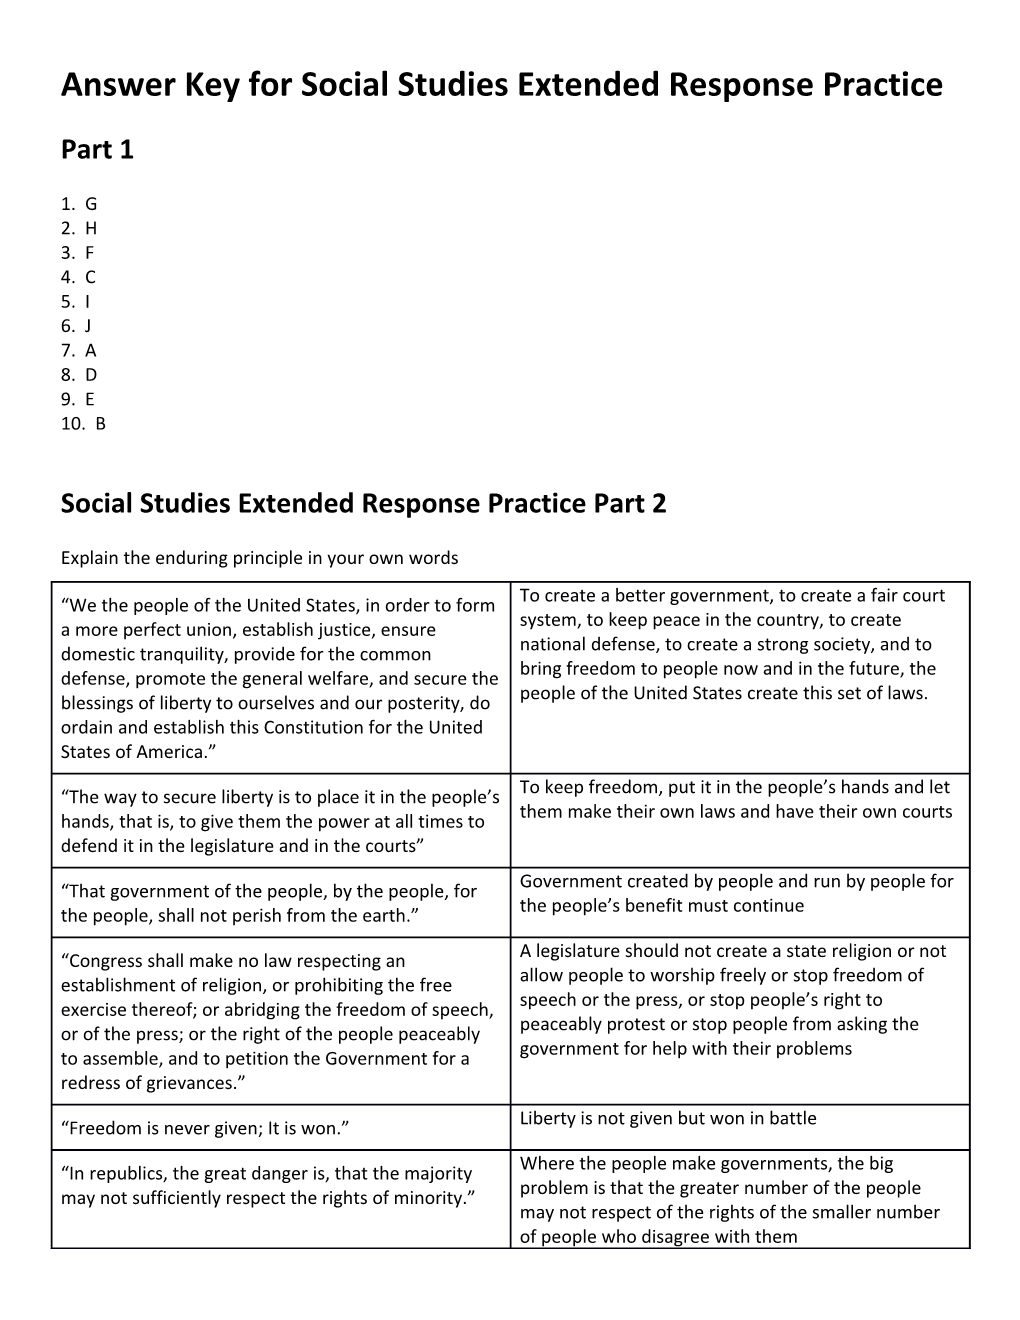 Answer Key for Social Studies Extended Response Practice